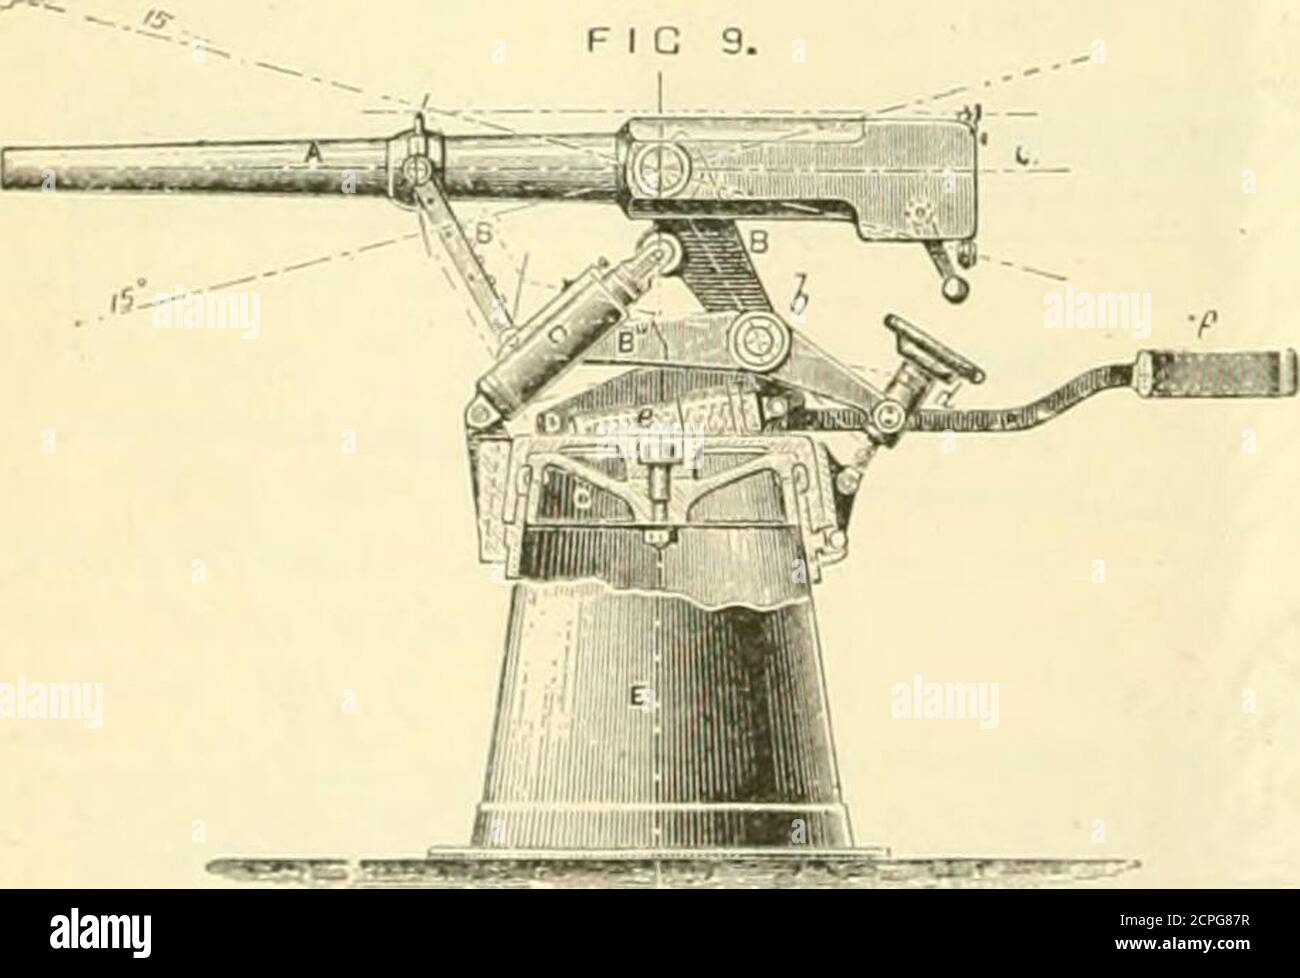 . The railroad and engineering journal . t-^ -^^ -s. v^x ^^^---^^Sijiii; Fig. 8. the barrel of this 5.3-cm. gun is 73.03 in. The rifling con-sists of 24 grooves of the section shown in fig. 7. Thetwist is right-handed, increasing from i in 165 to i in 30calibers. The entire gun is 80.7 in. long. The diameterof the powder chamber is 2.52 in., that of the bore being2.087 • The gun weighs 595.2 lbs., or with breech-block639.3 lbs. The charge is 1.565 lbs. The shell weighs 4. F I C 10 Stock Photo